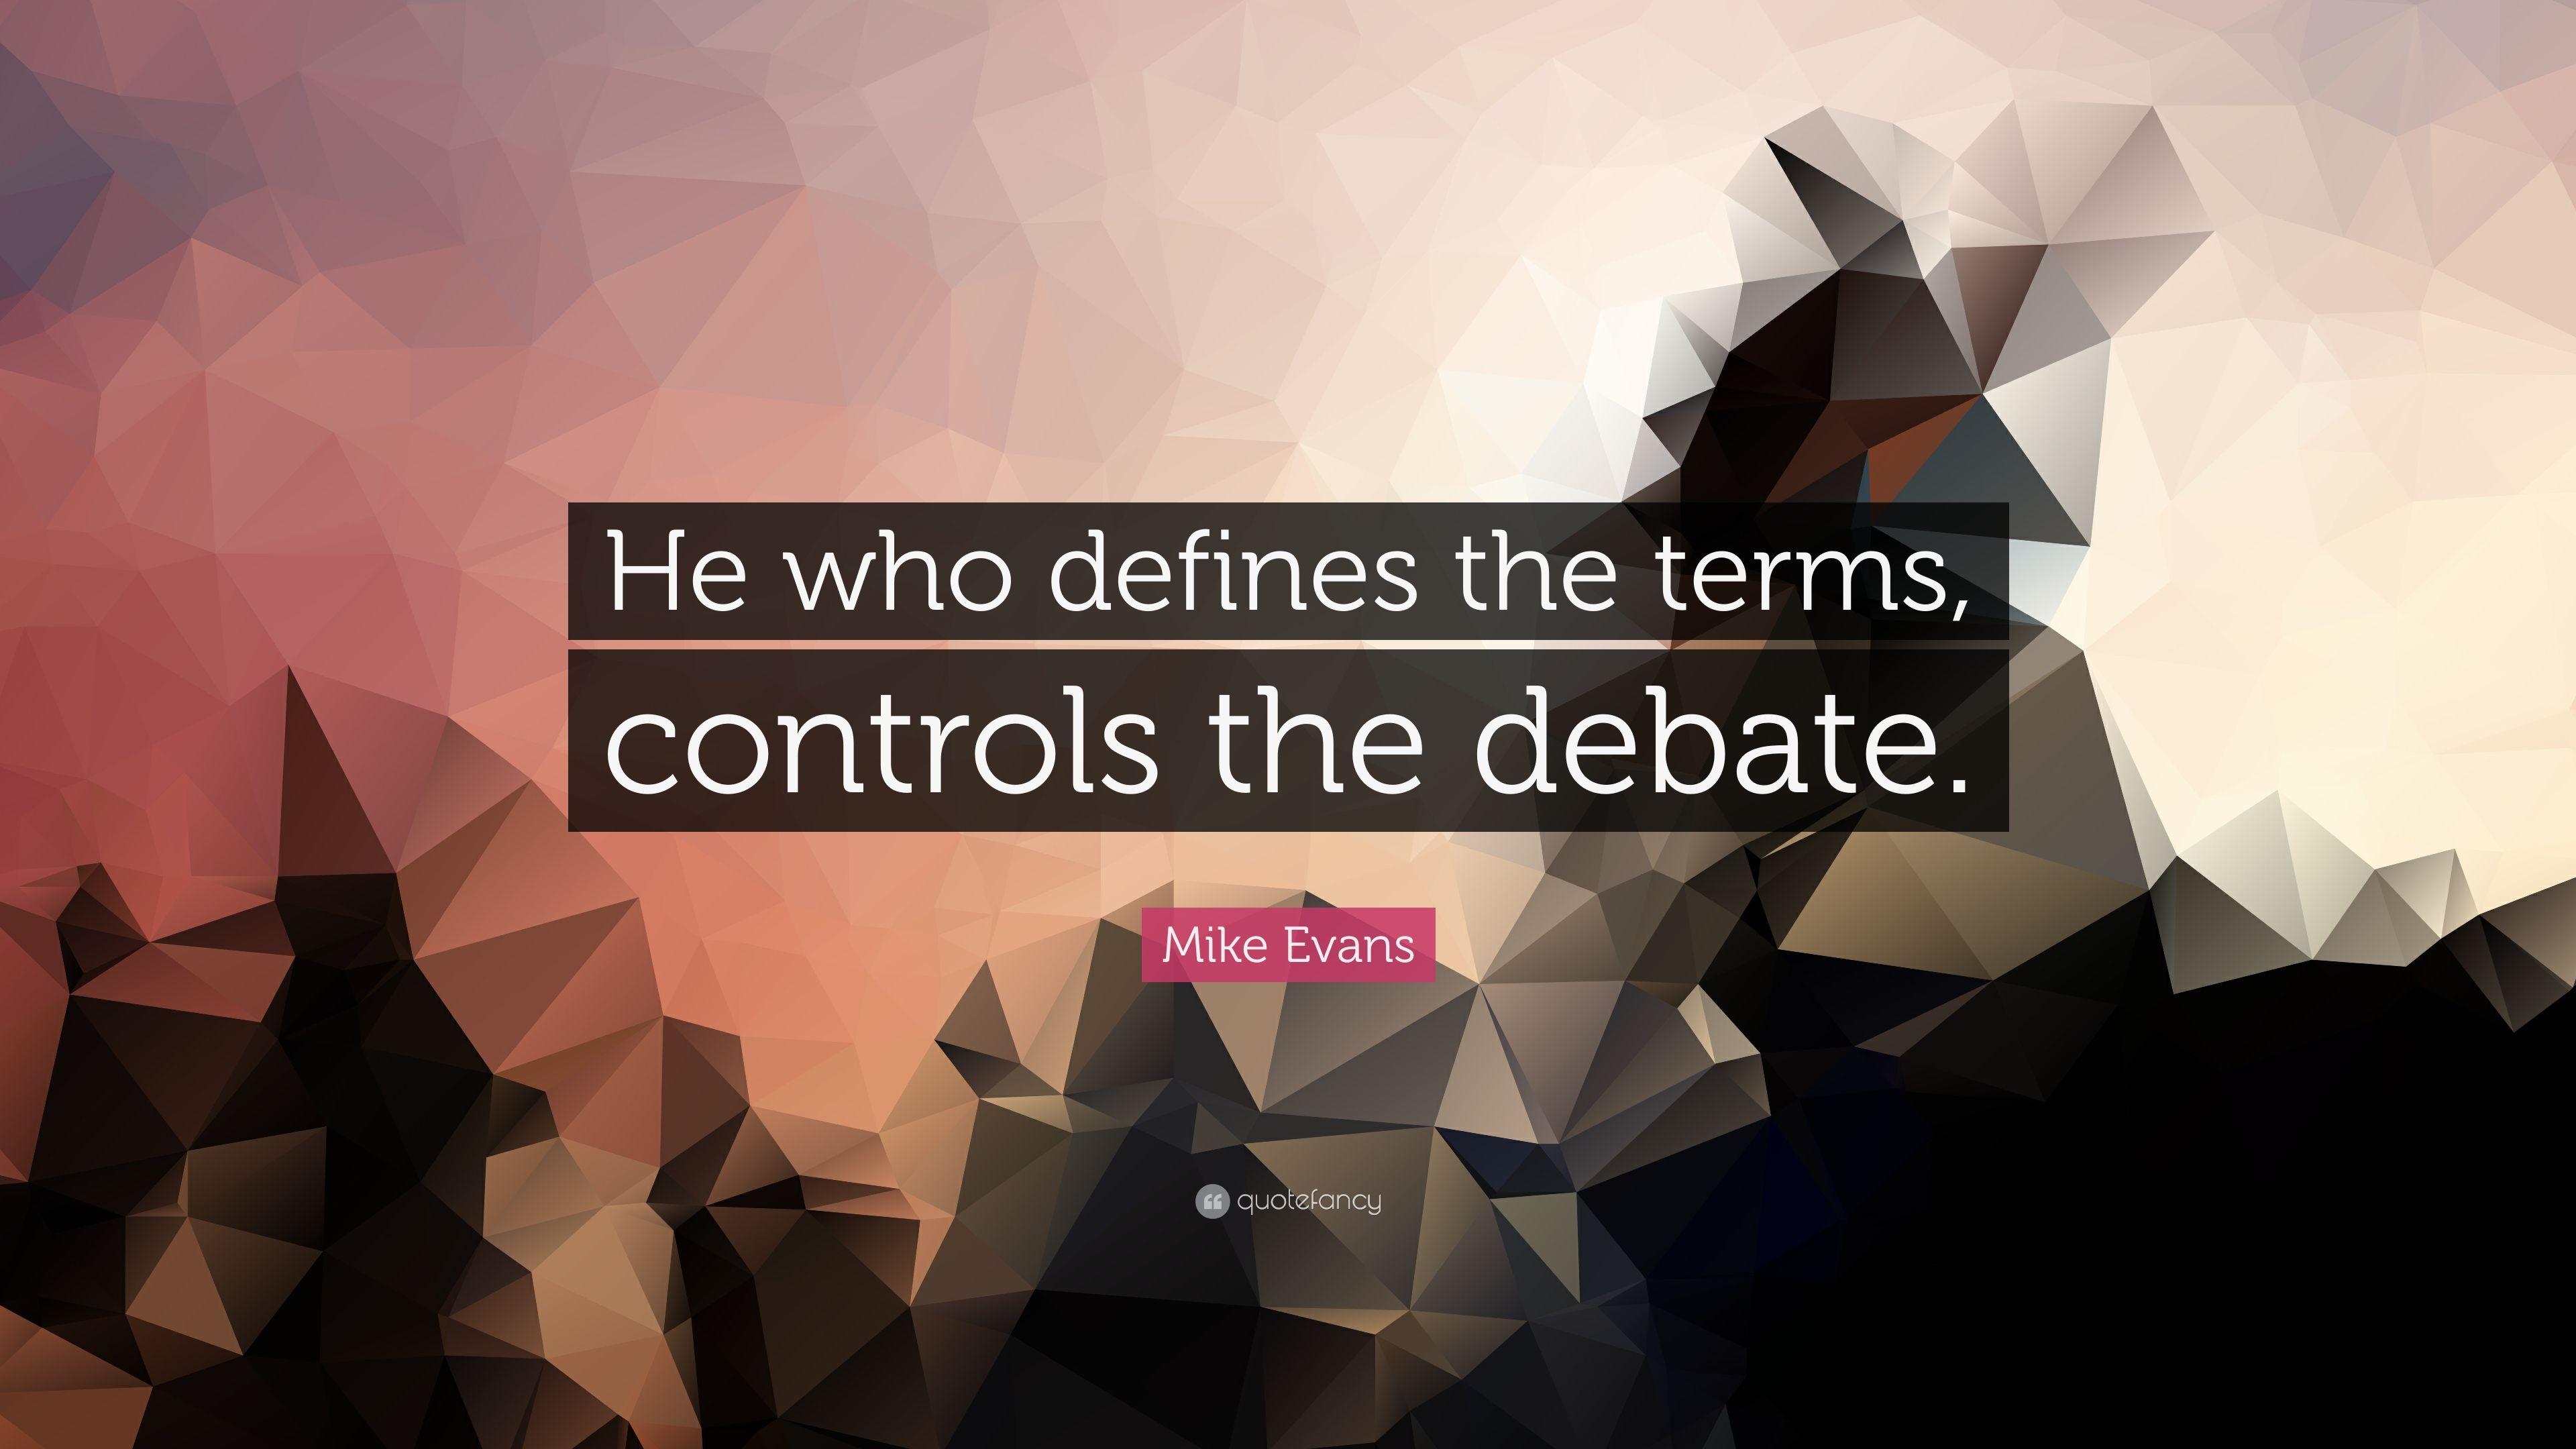 Mike Evans Quote: “He who defines the terms, controls the debate